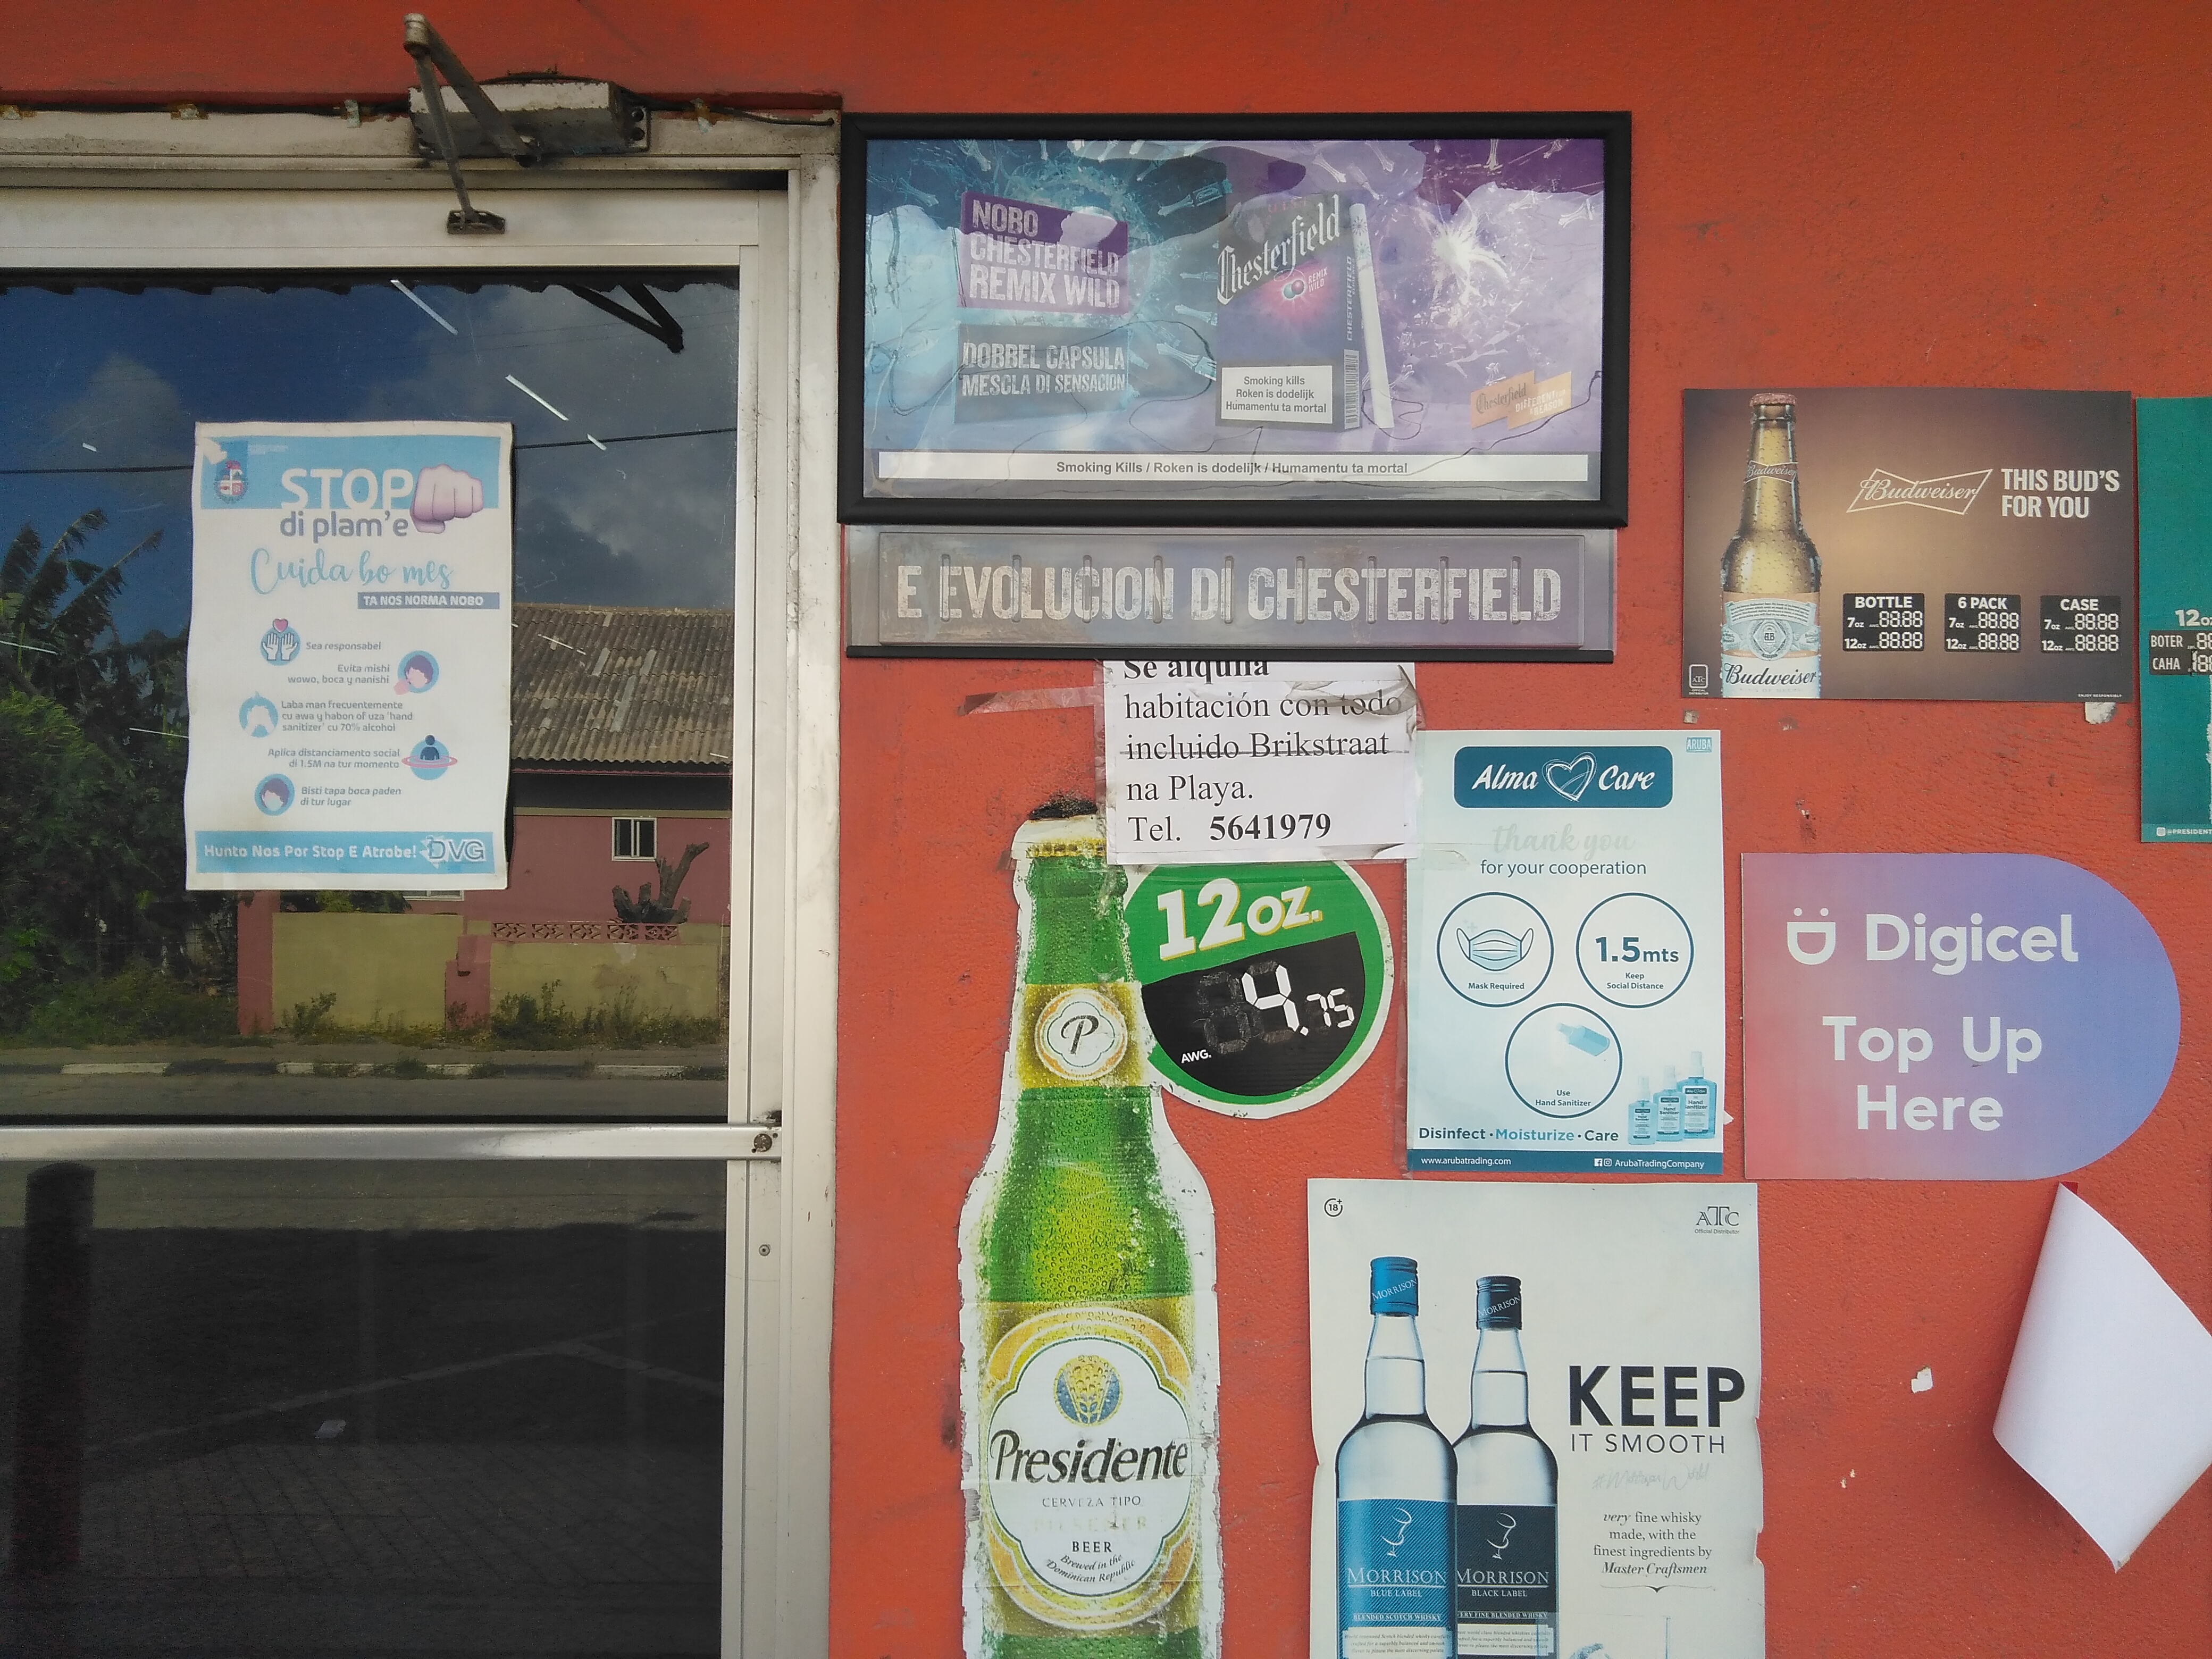 A storefront in Oranjestad (look at the health warning on the cigarette advert).